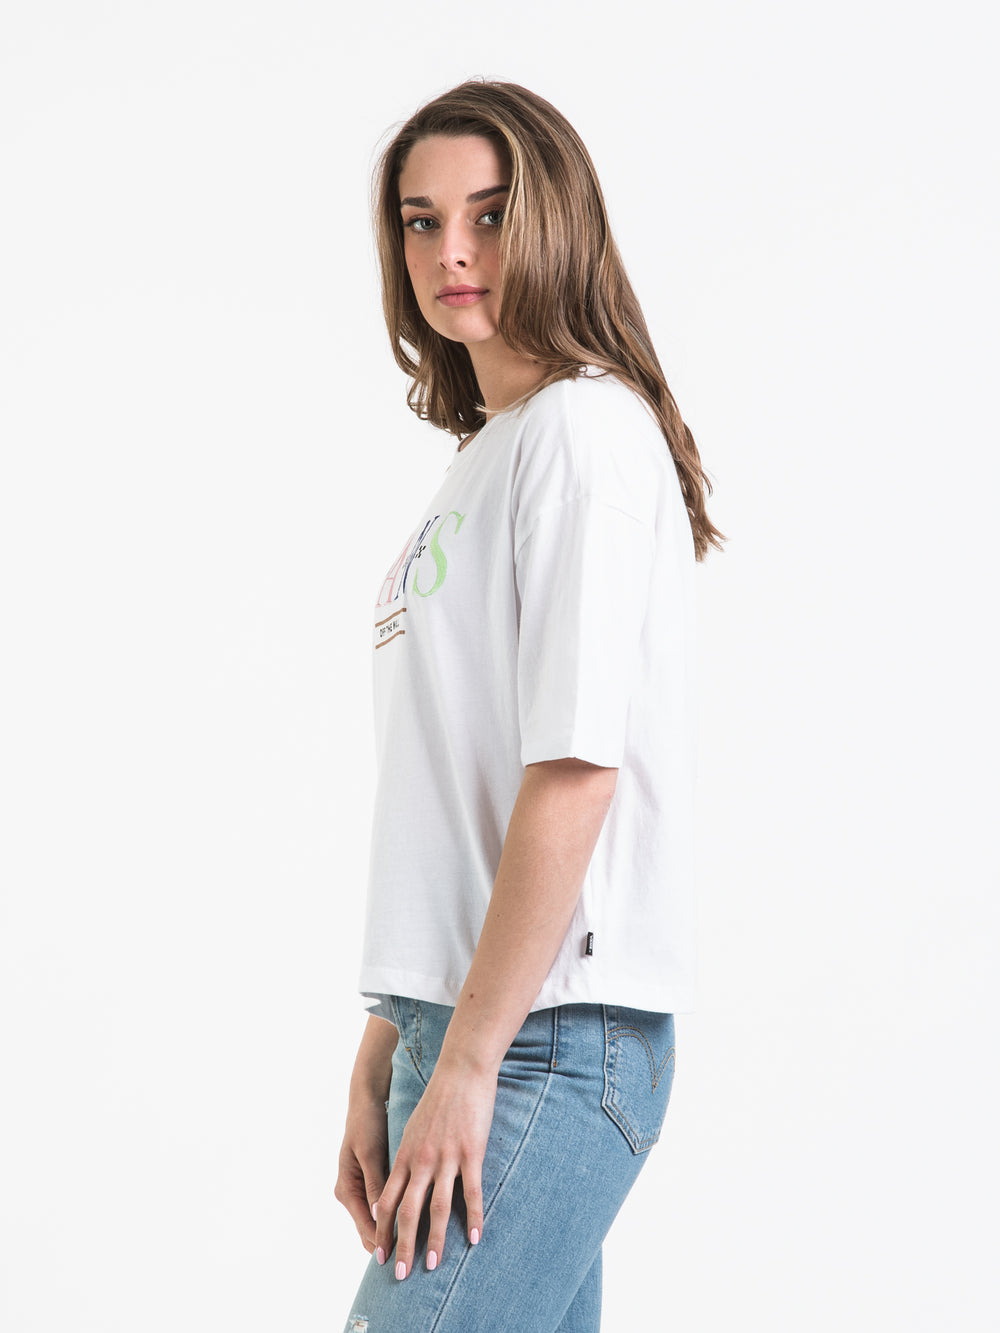 VANS BURN SLOW EMBROIDERED LOGO T-SHIRT - CLEARANCE